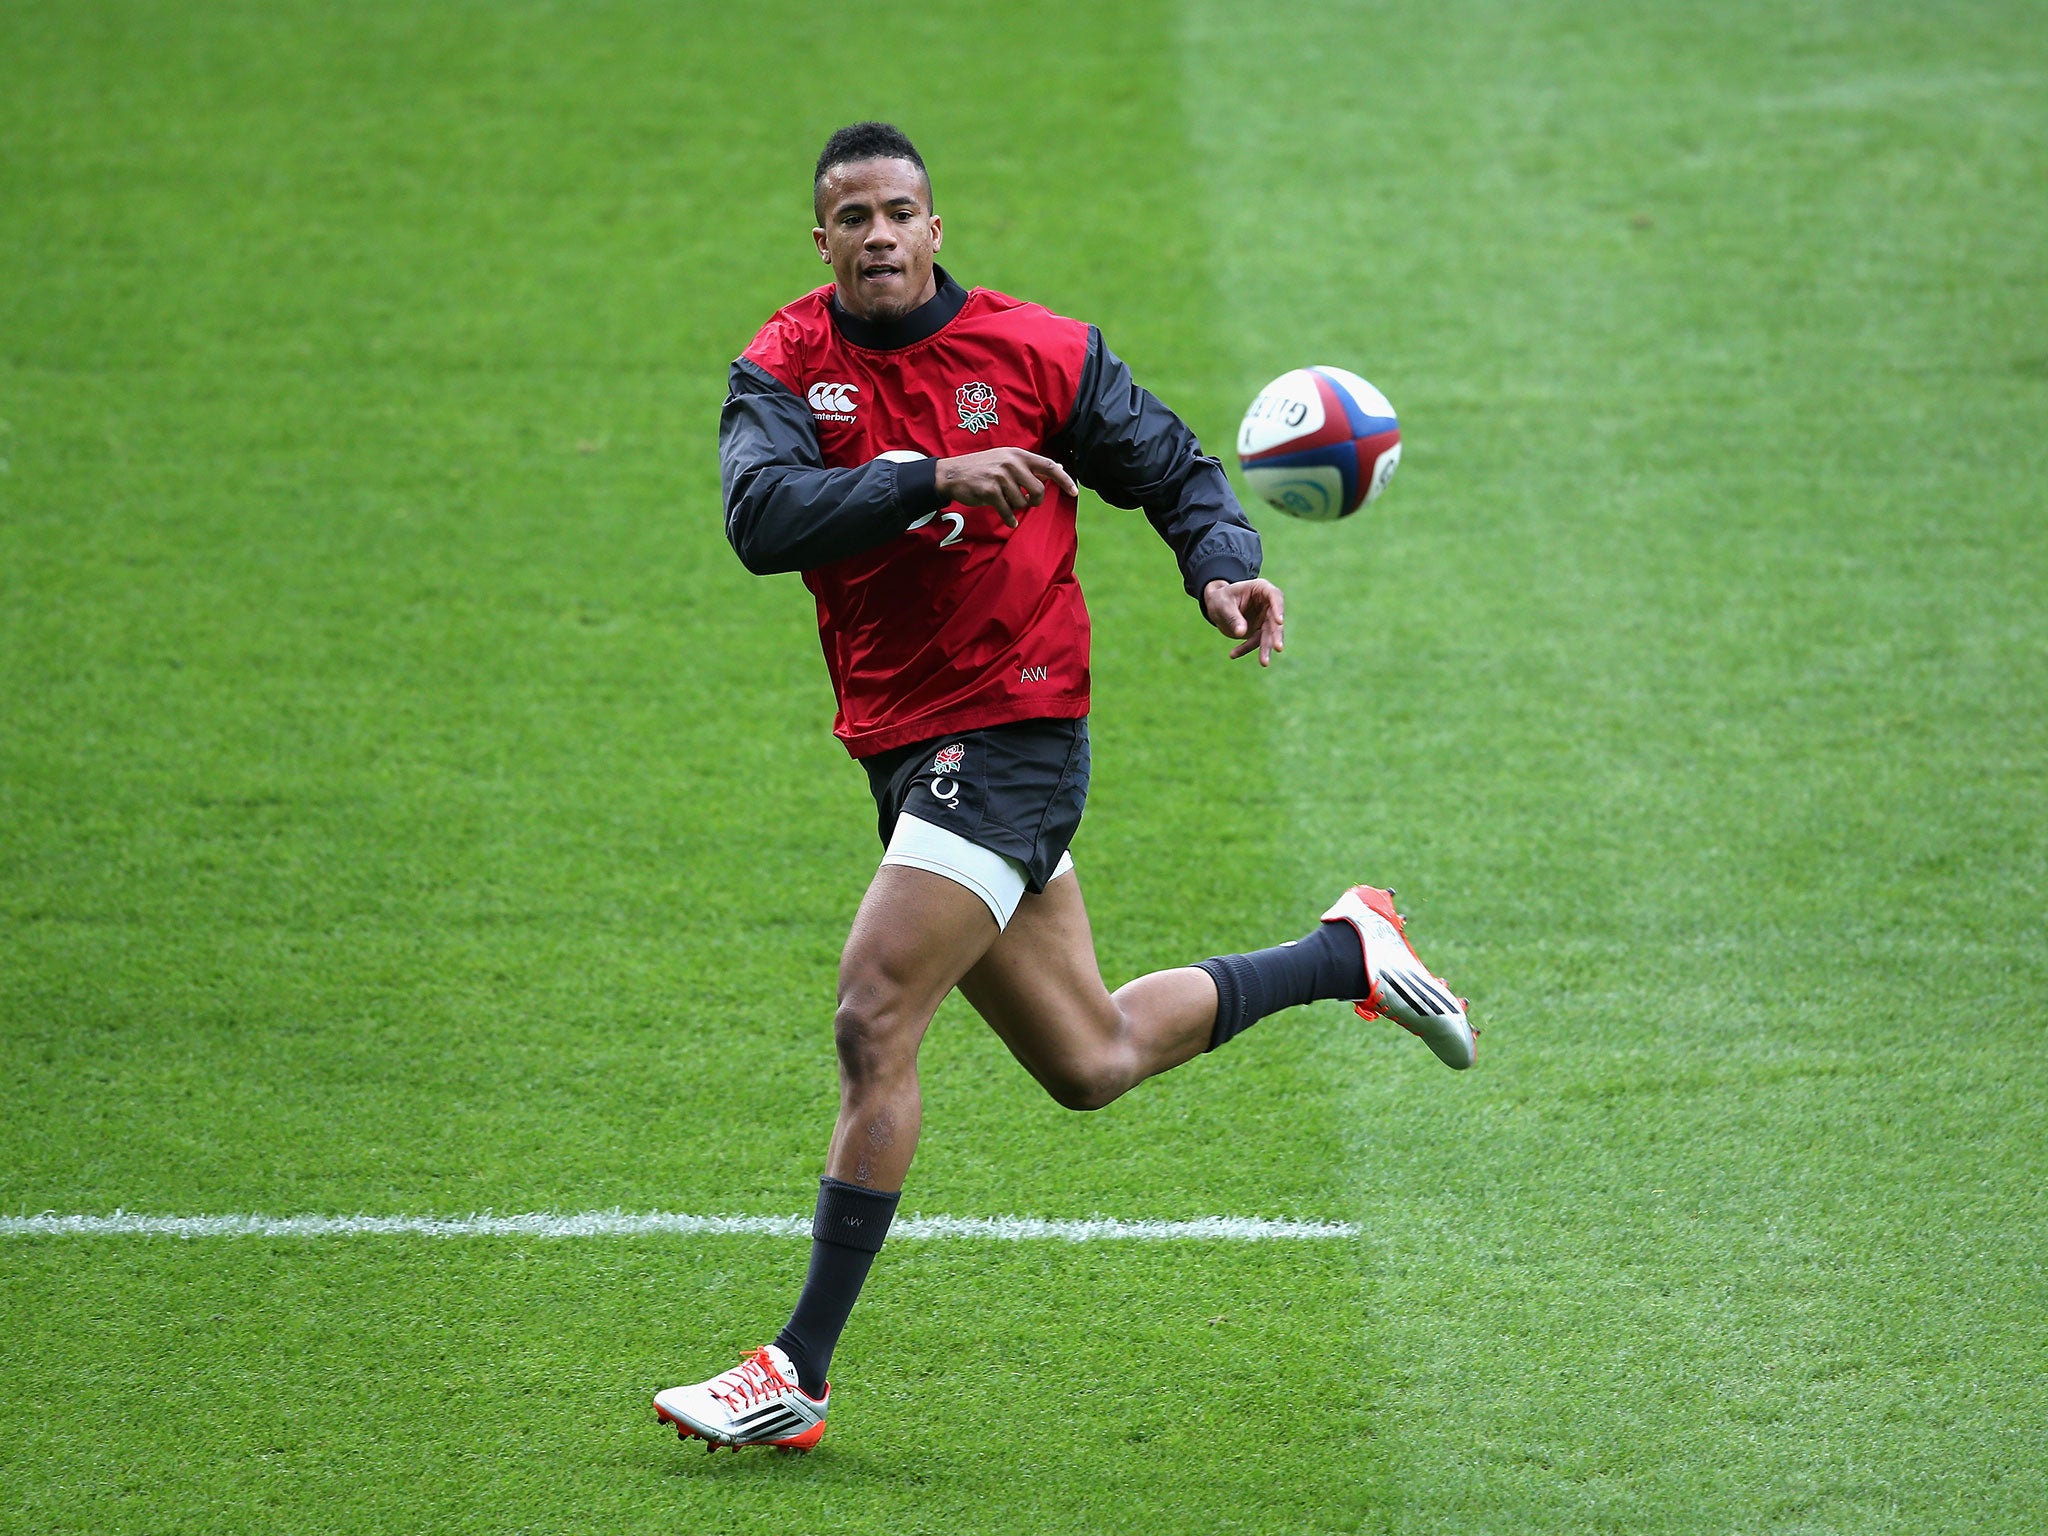 Bath wing Anthony Watson will make his first start for England against South Africa